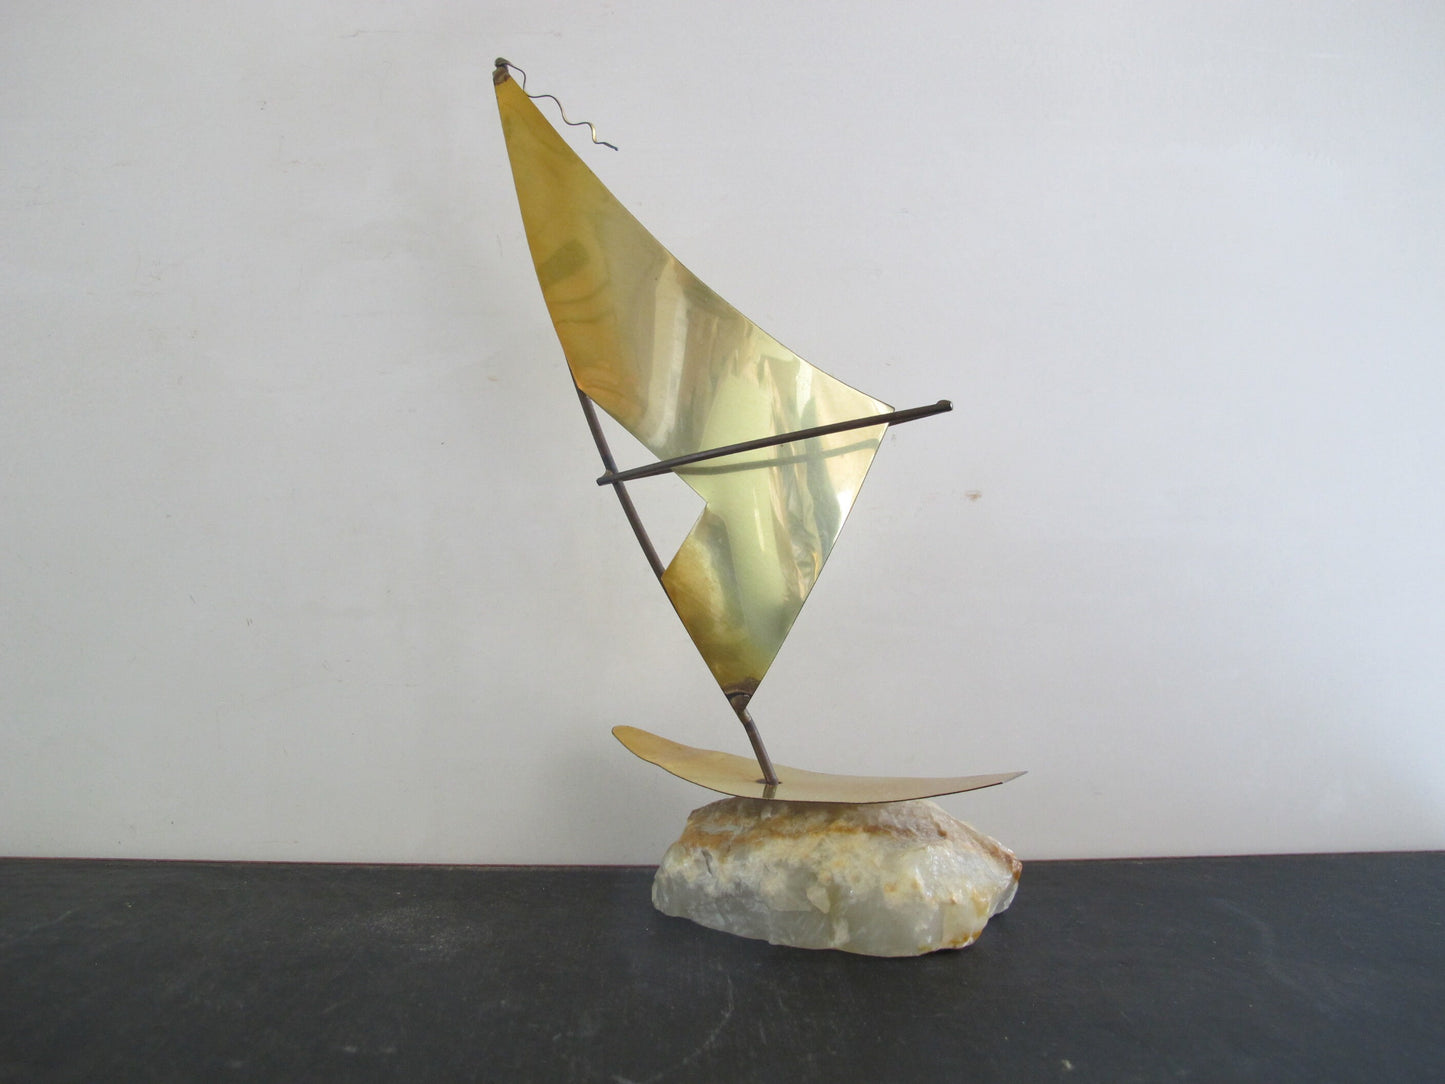 Sculpture Sailboat Brass Onyx 1970s 1960s Curtis Jere Style